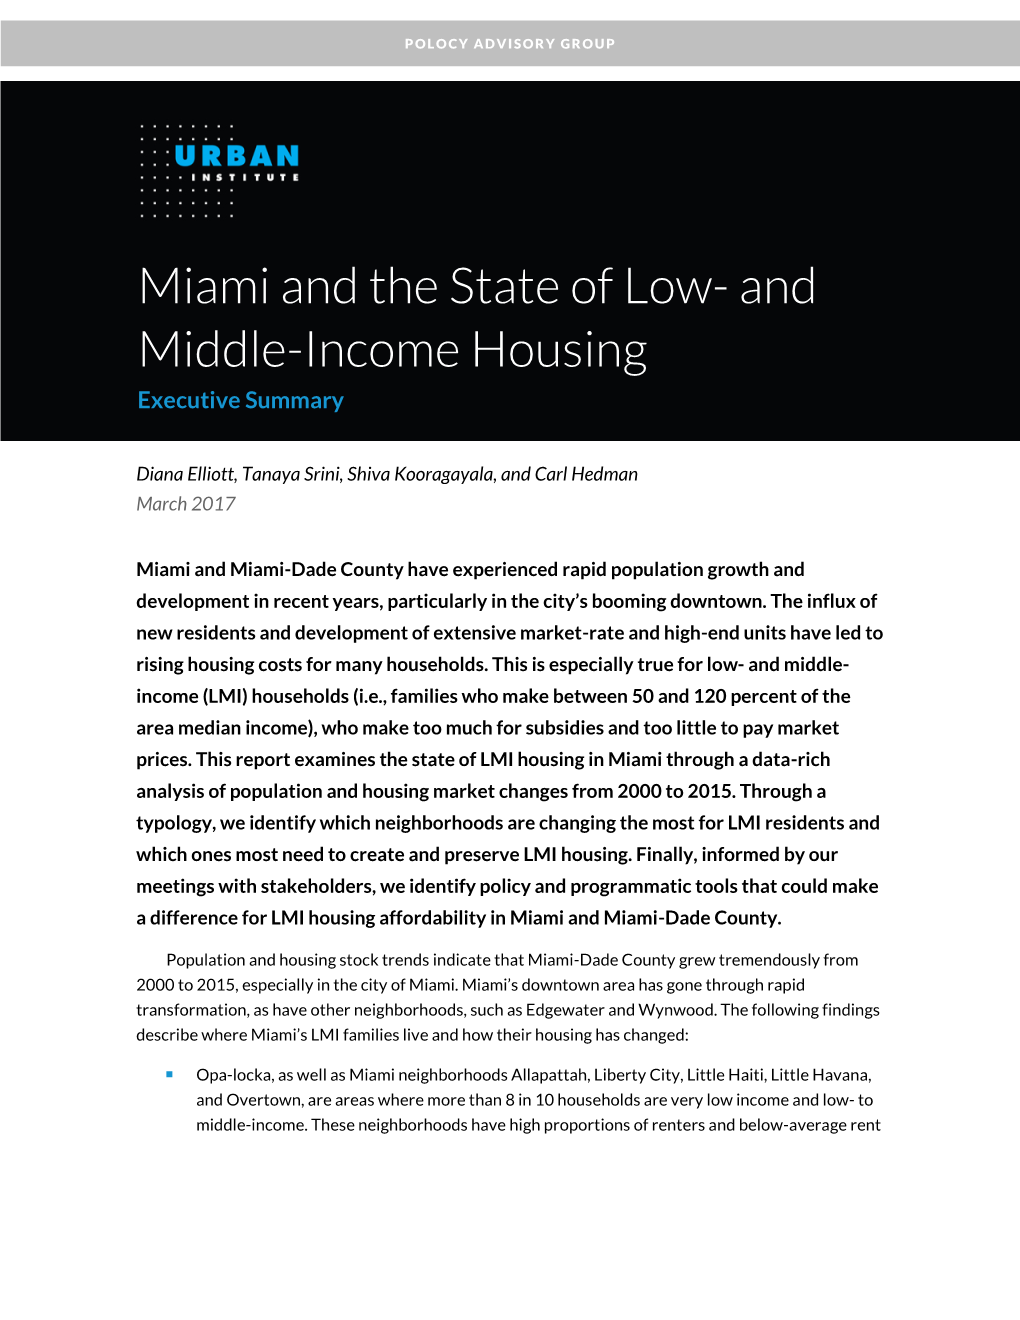 Miami and the State of Low- and Middle-Income Housing Executive Summary